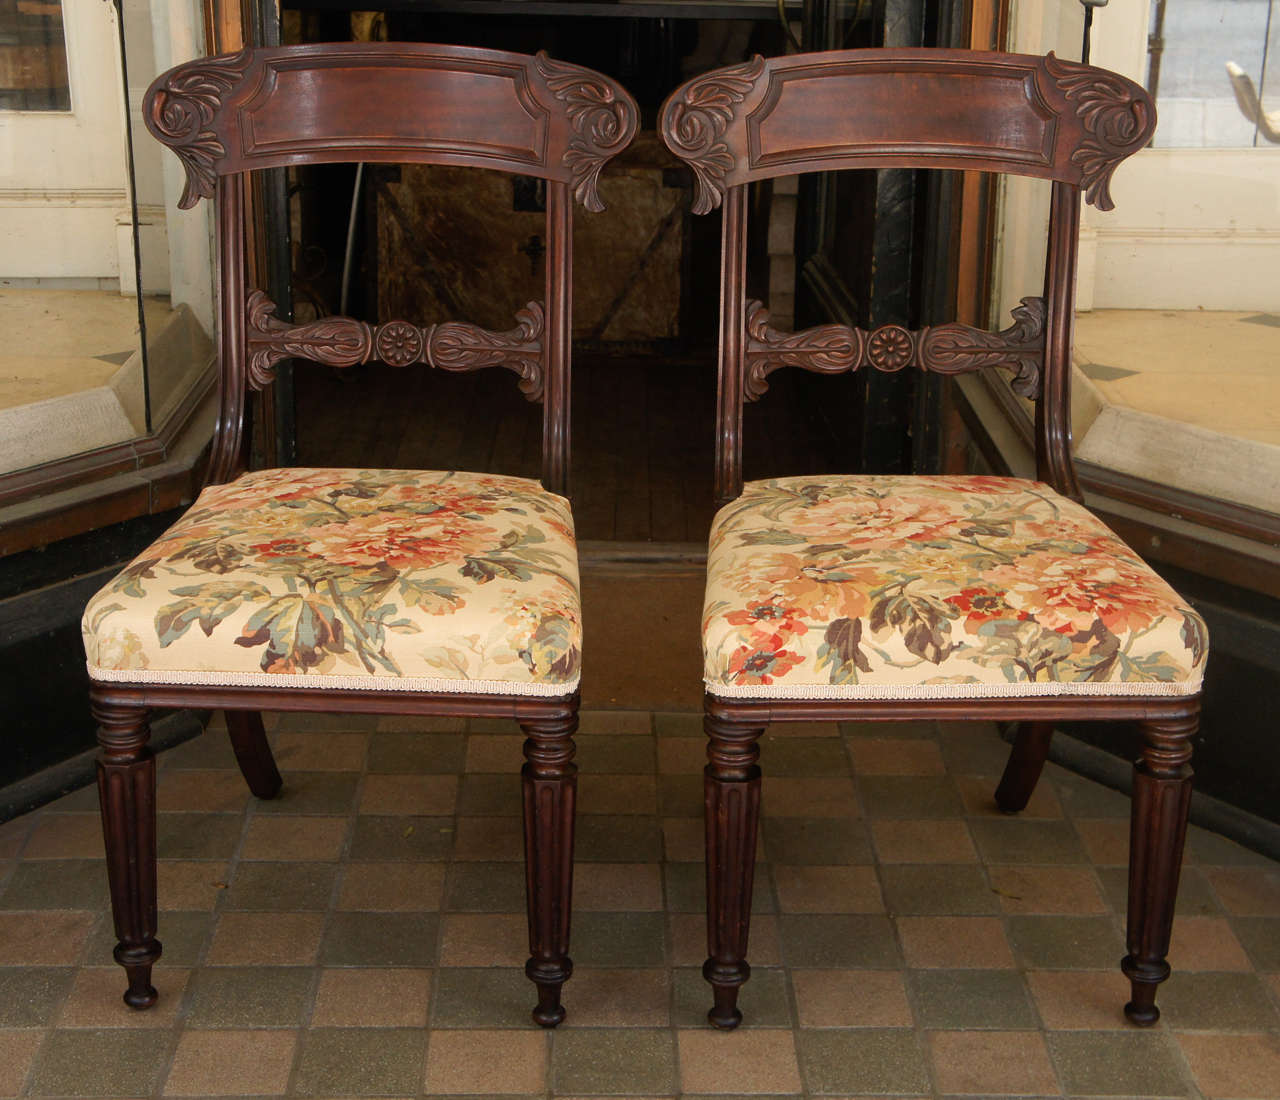 British A Very Good Pair of William IV Side Chairs